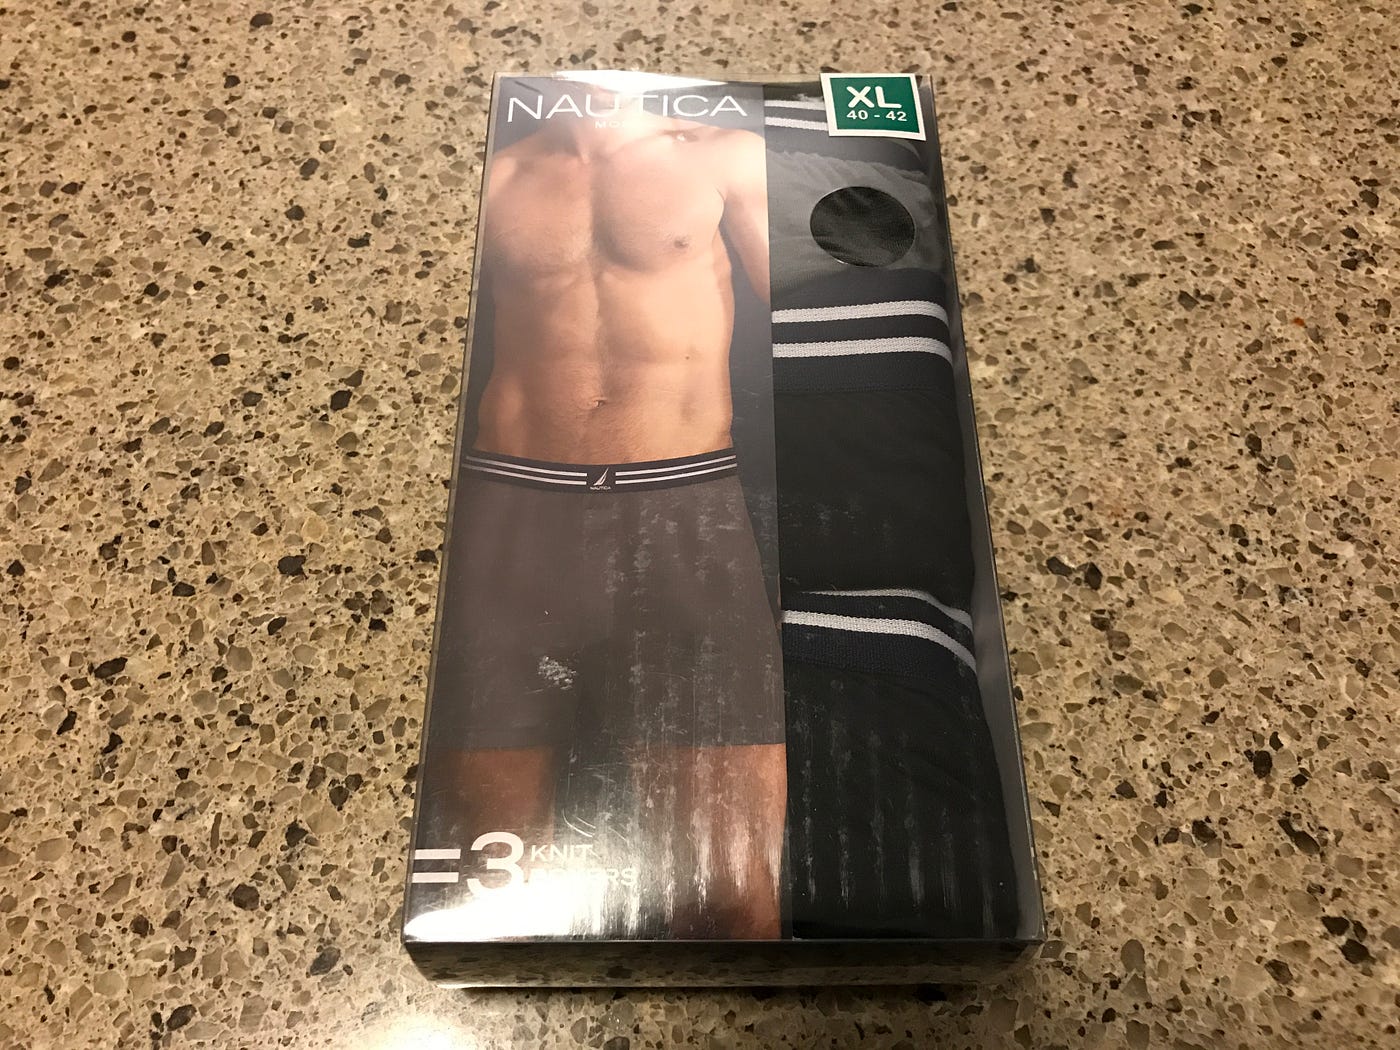 Nautica Knit Boxer Flash Review. Should have read the package better., by  Datapotomus